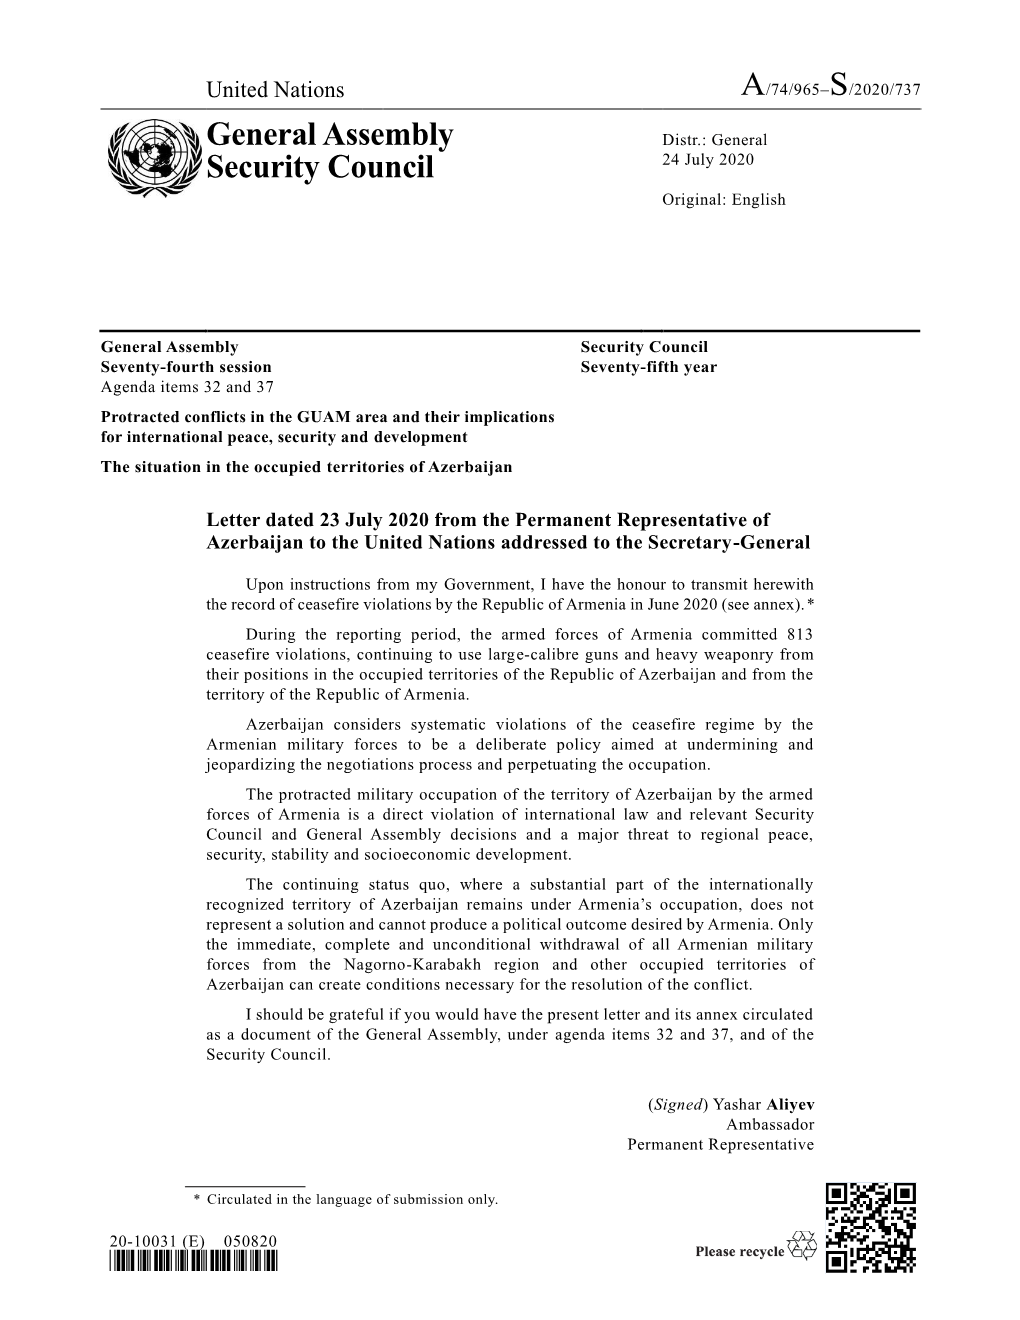 Letter Dated 23 July 2020 from the Permanent Representative of Azerbaijan to the United Nations Addressed to the Secretary-General